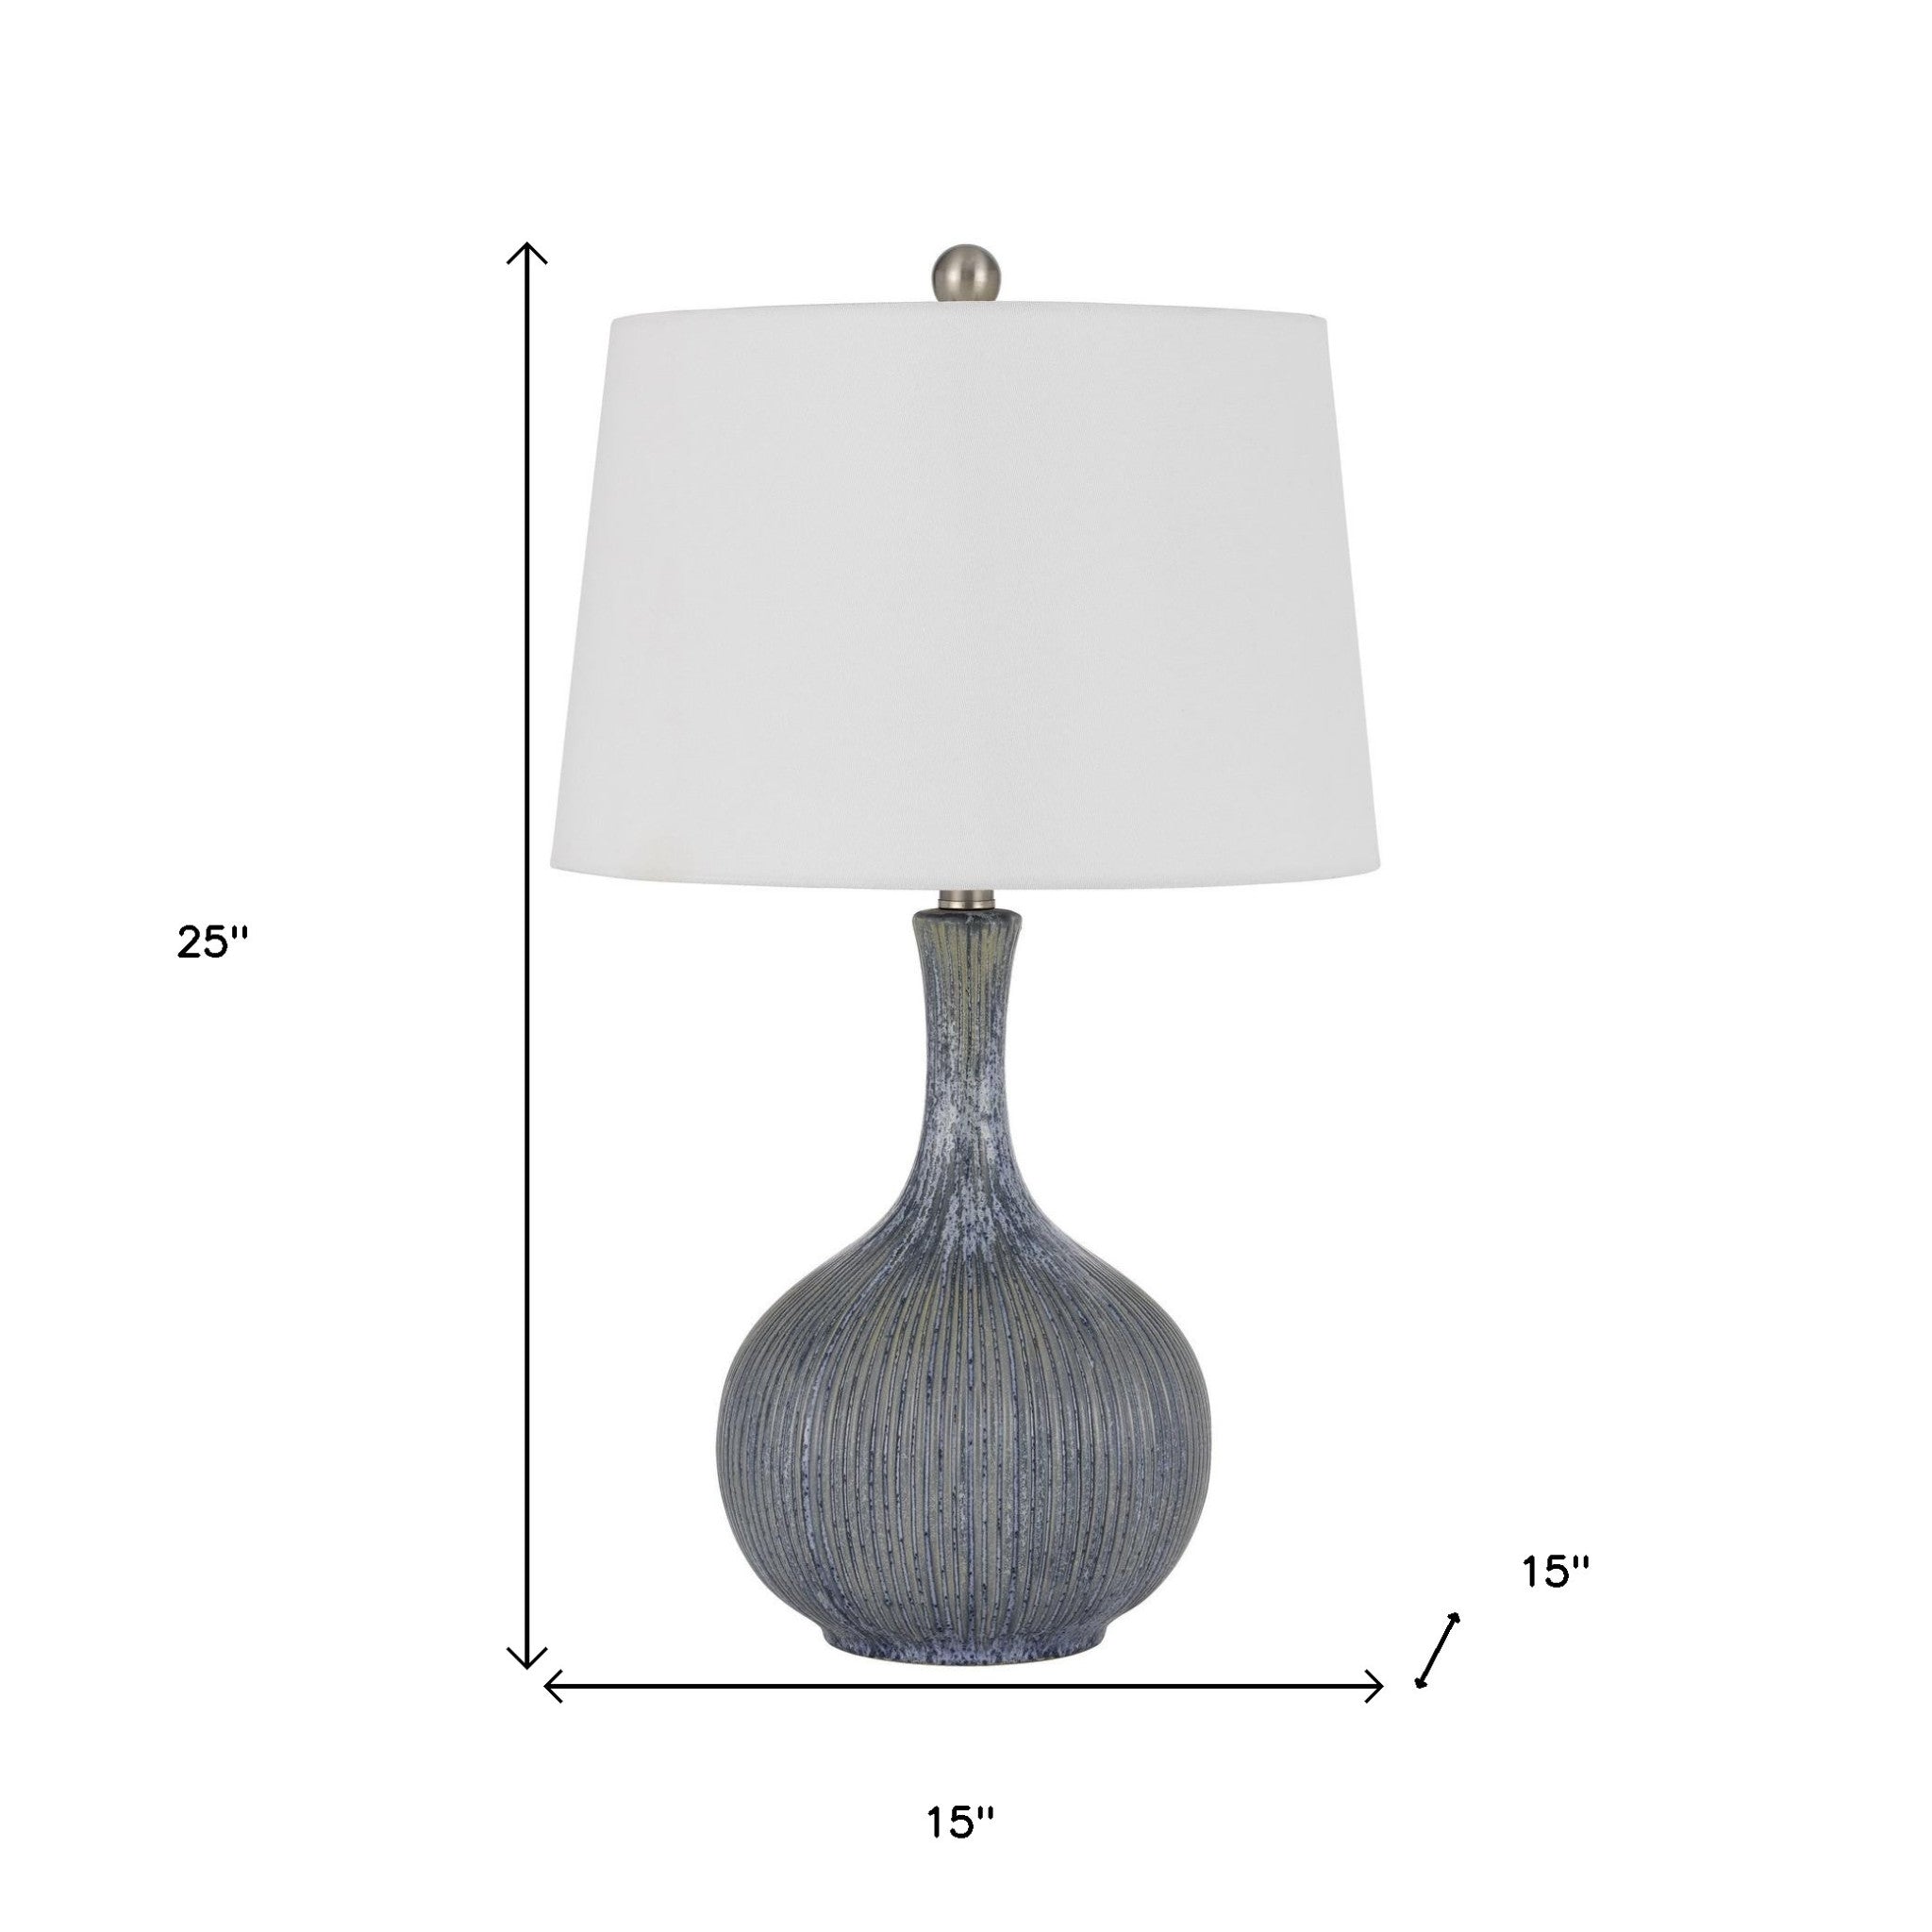 25" Stone Ceramic Table Lamp With White Empire Shade